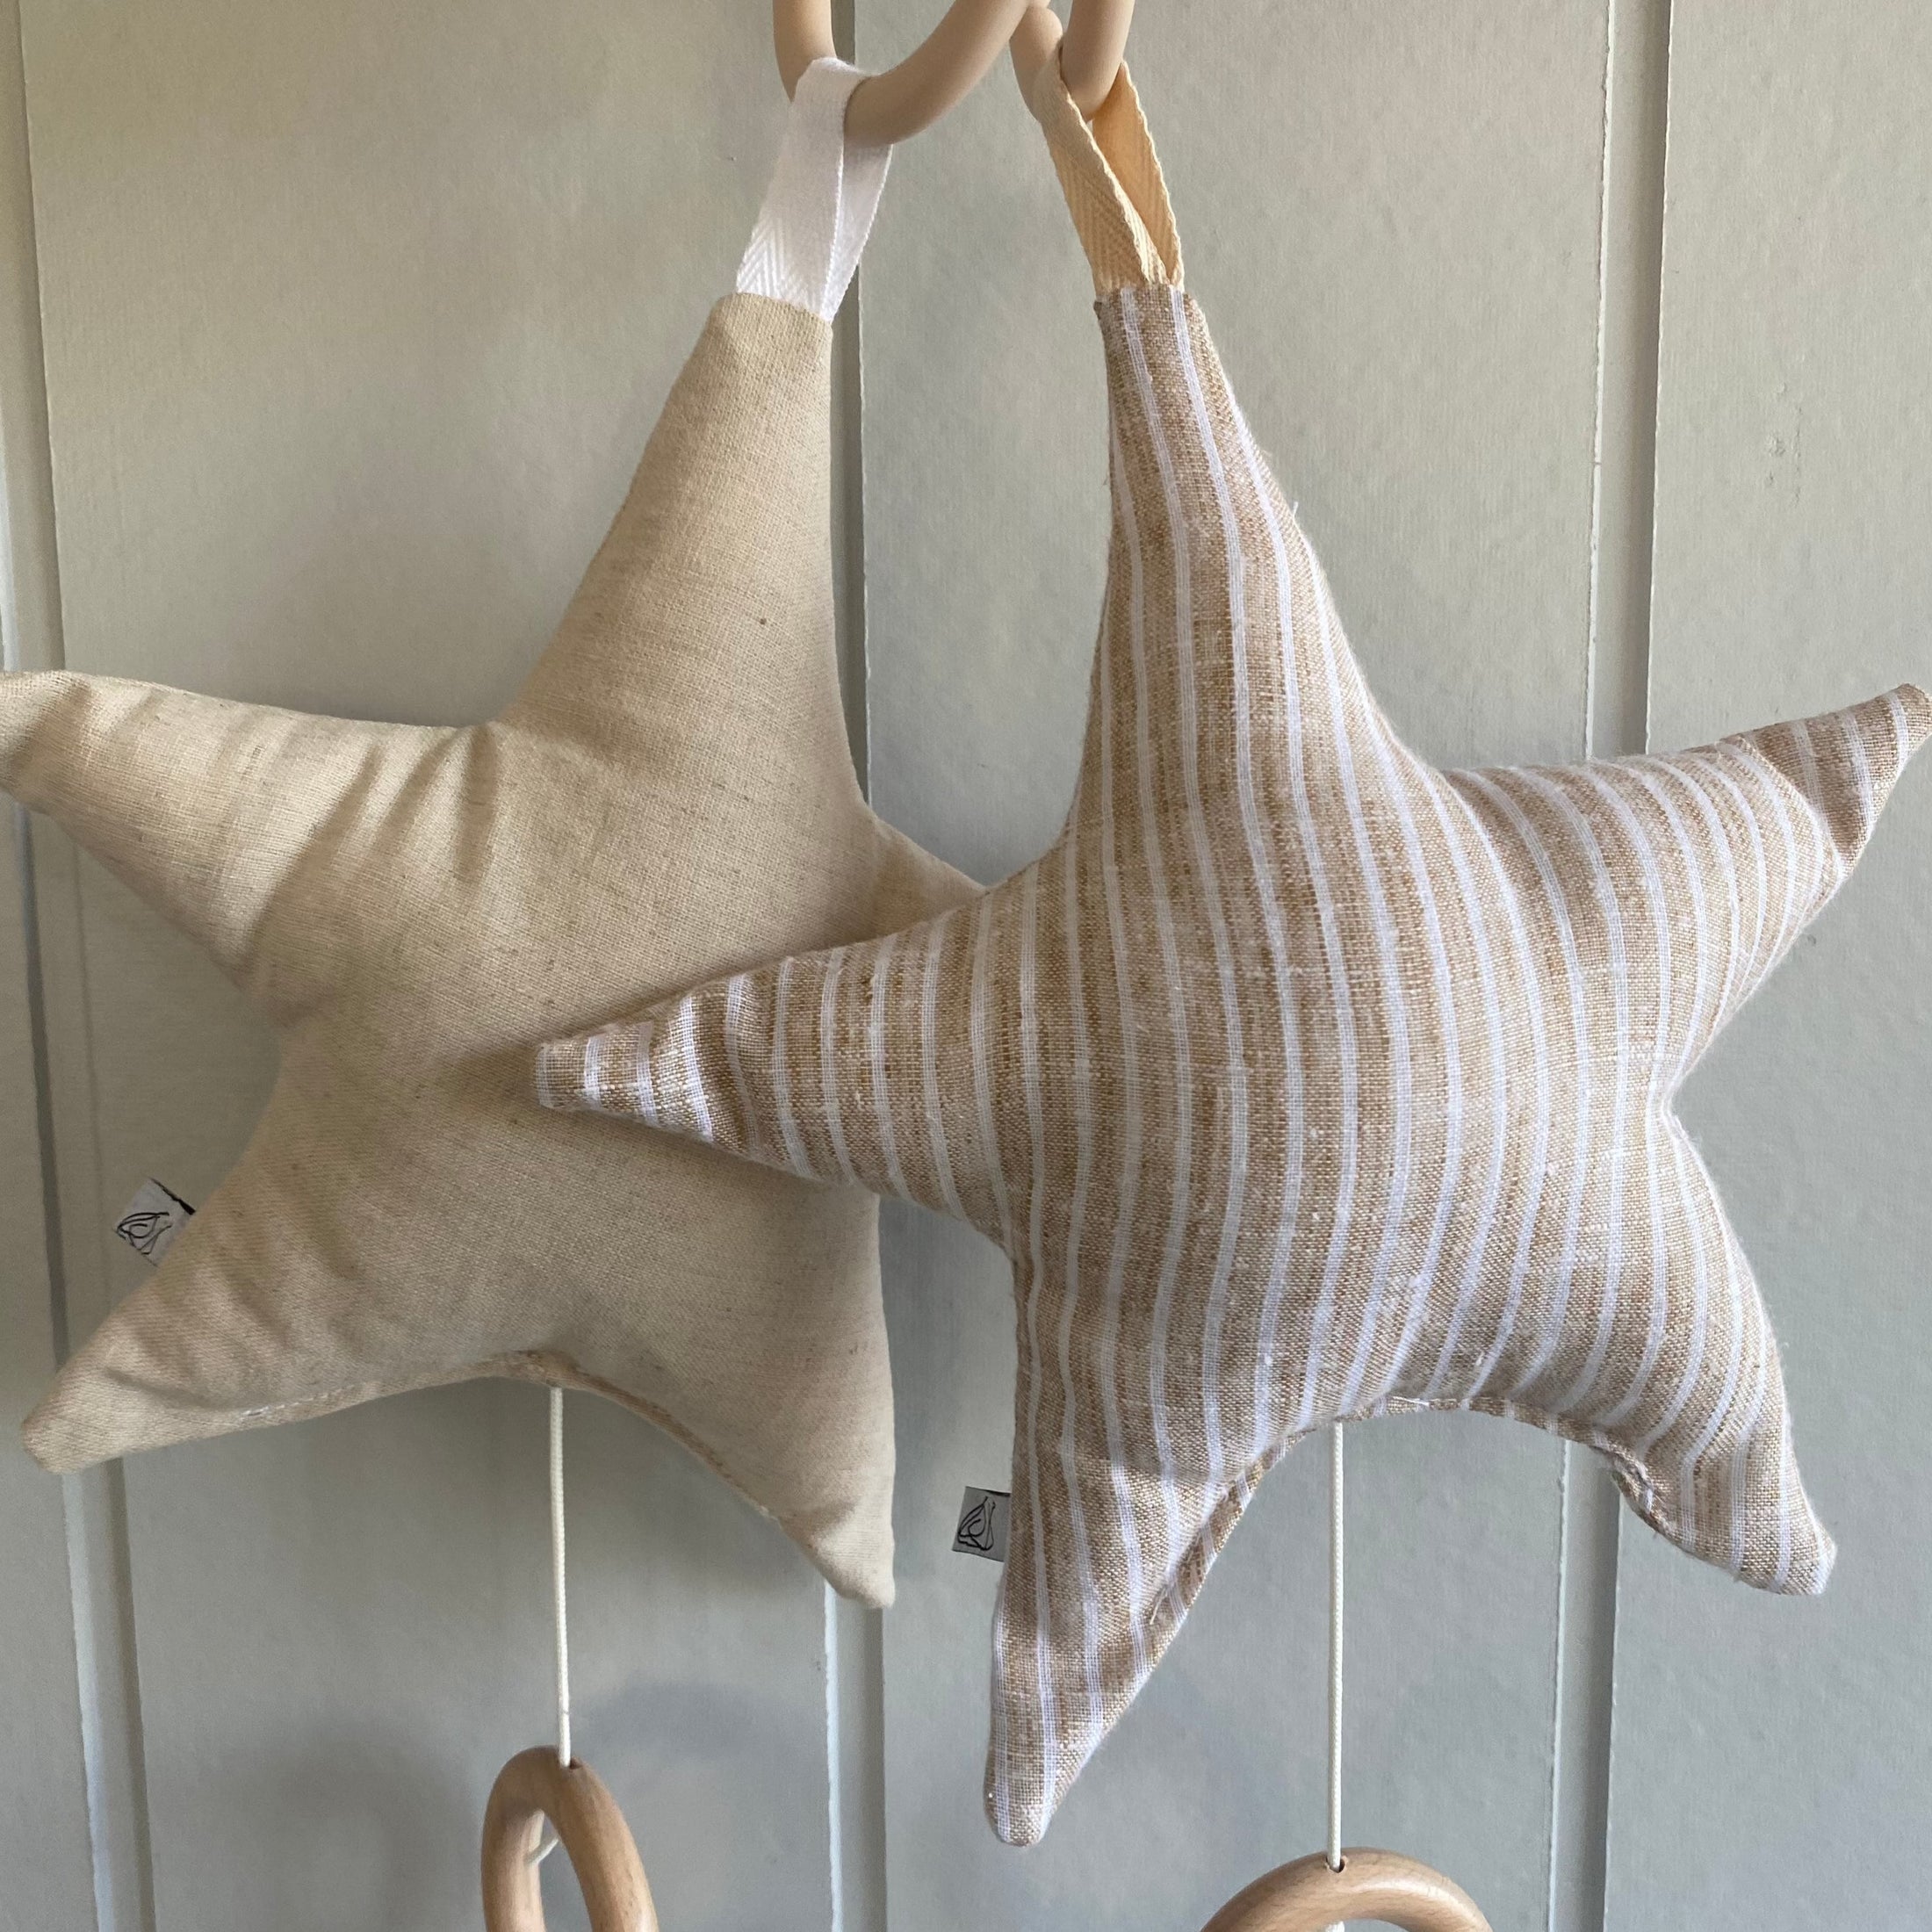 Hanging Musical Star | Lined Linen